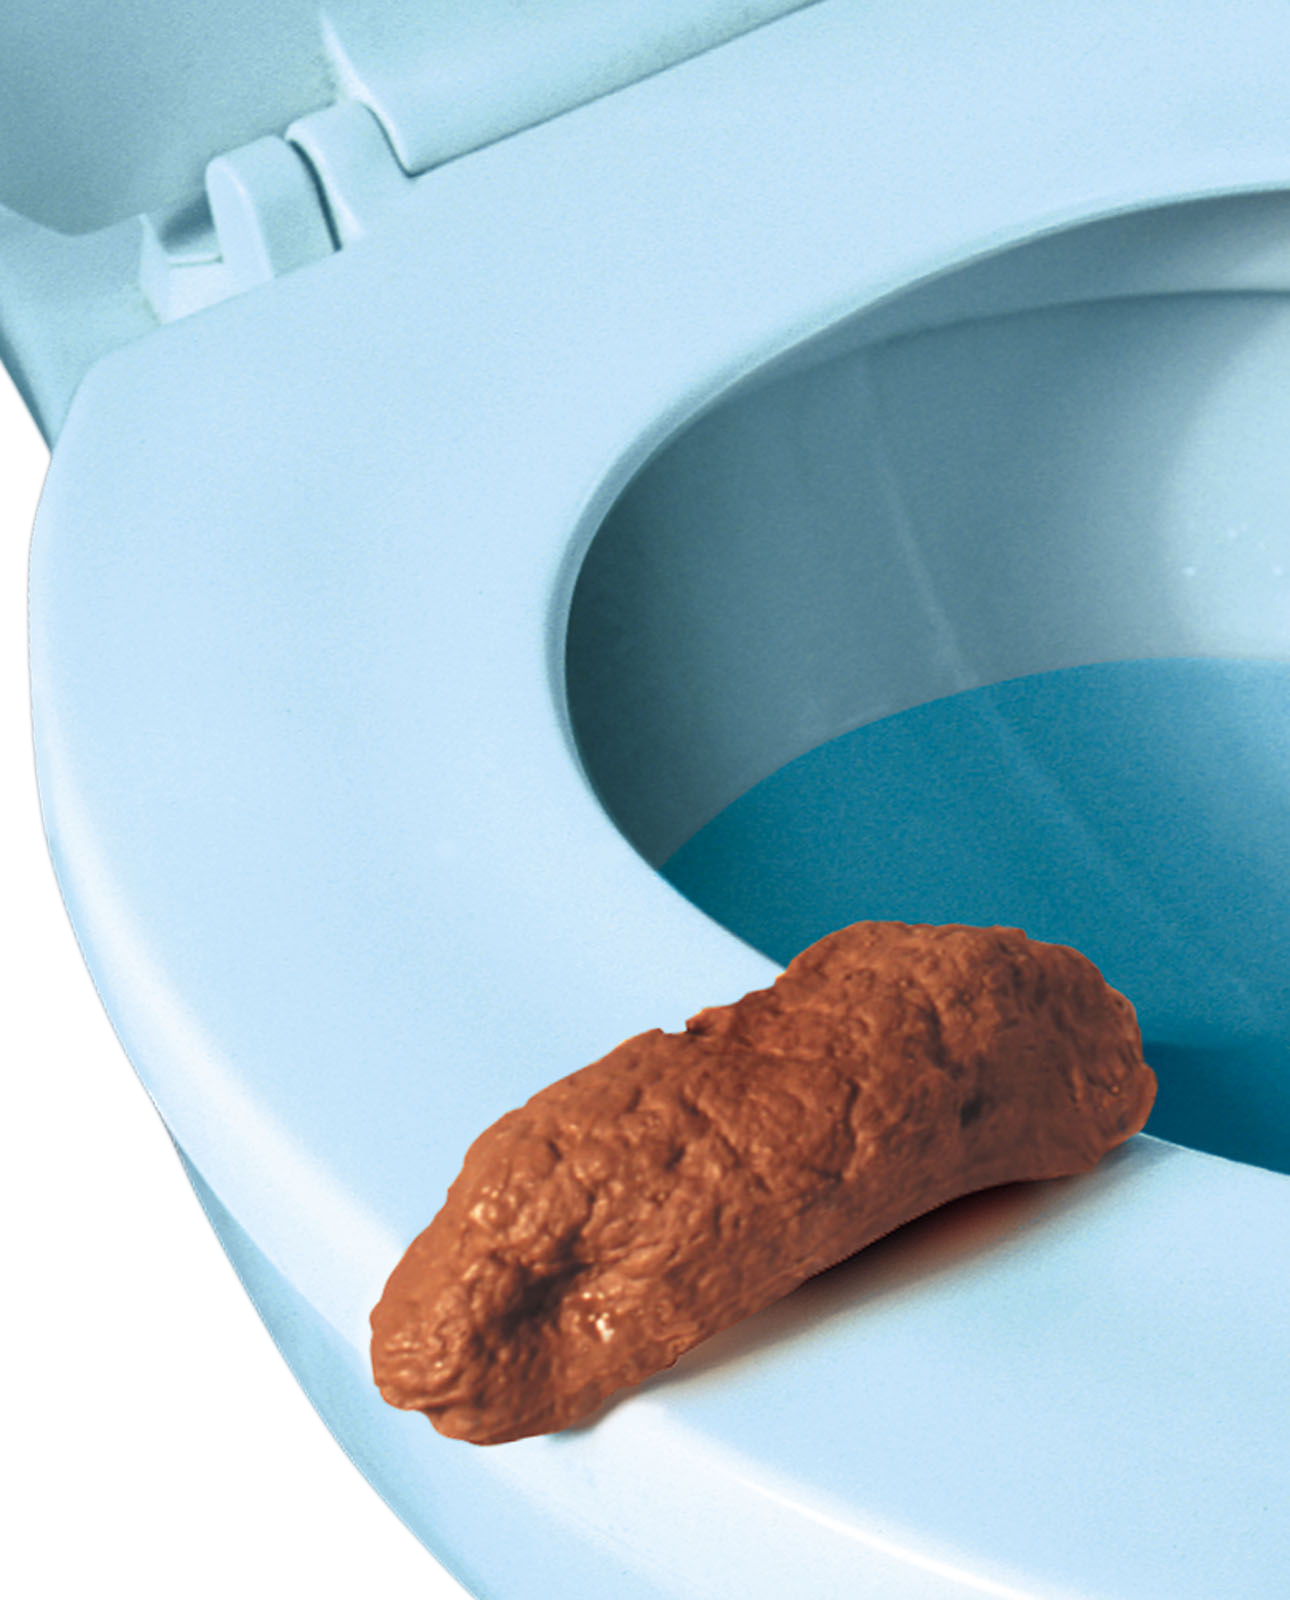 Loftus Gross Party Pooper Fake Poo 4 in Novelty Toy, Brown